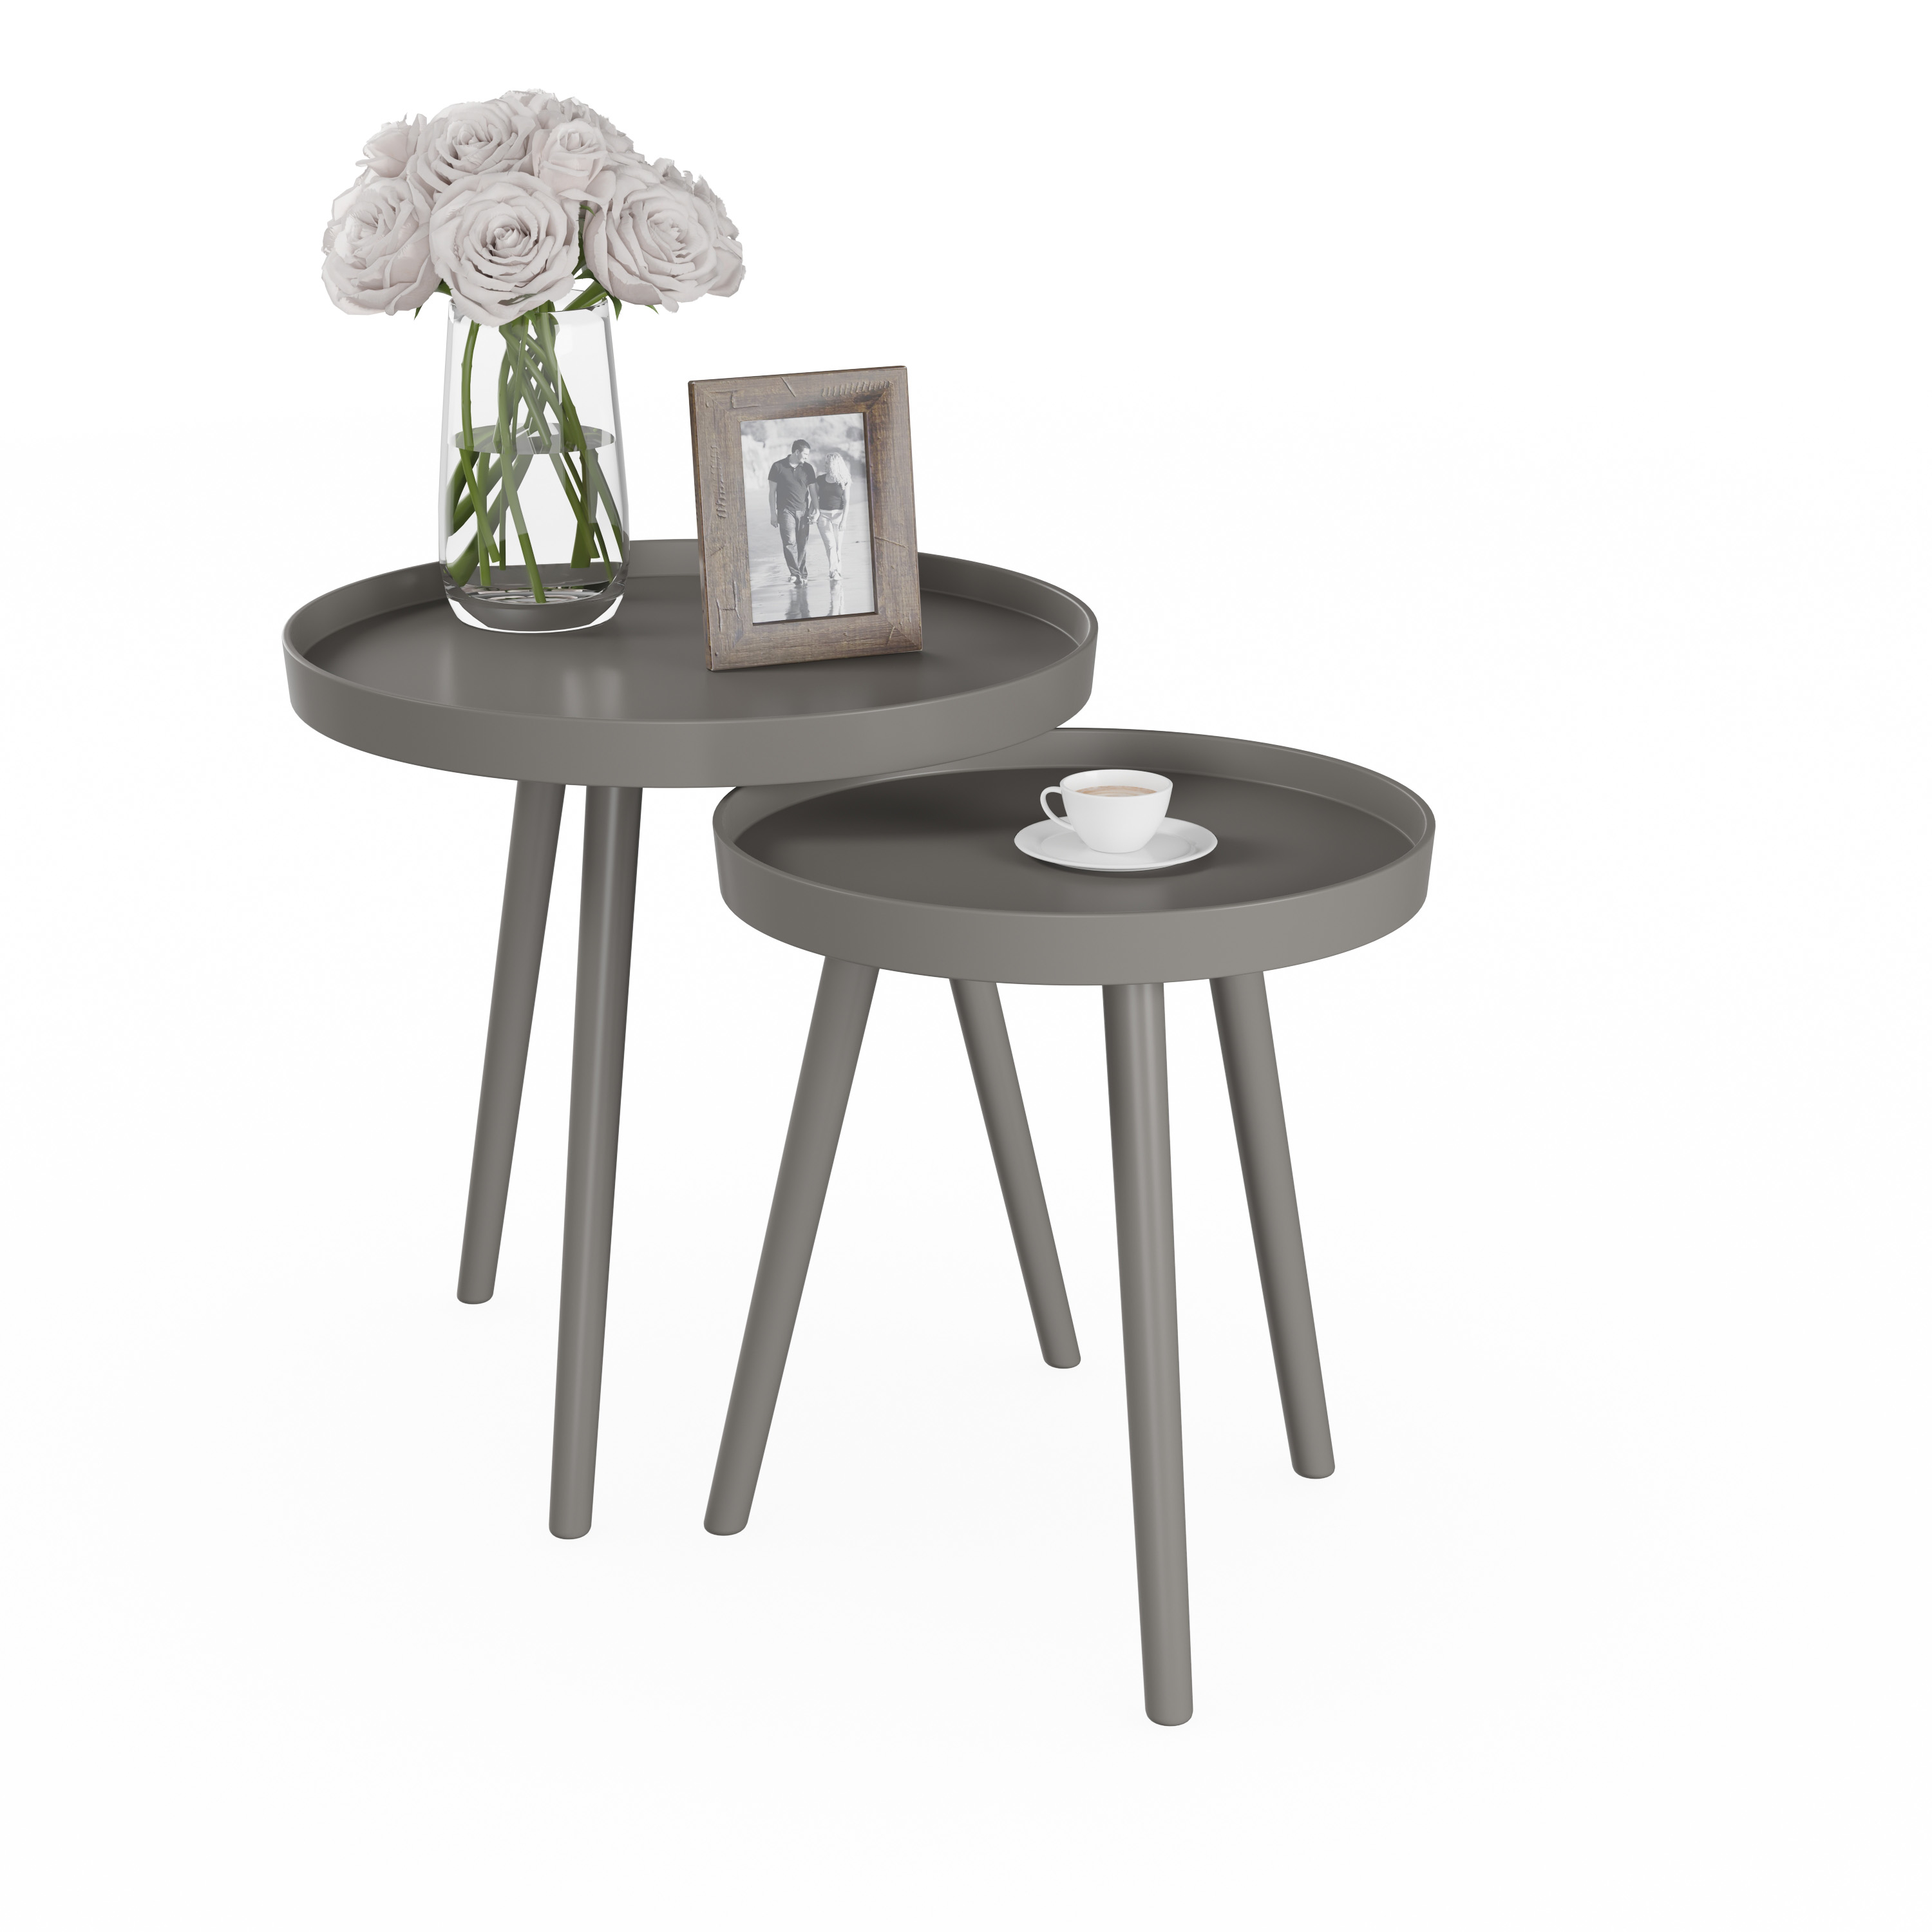 Set Of 2 Round Nesting Tables Rimmed End Tables Home Decor Night Stands Accent Tables - Gray